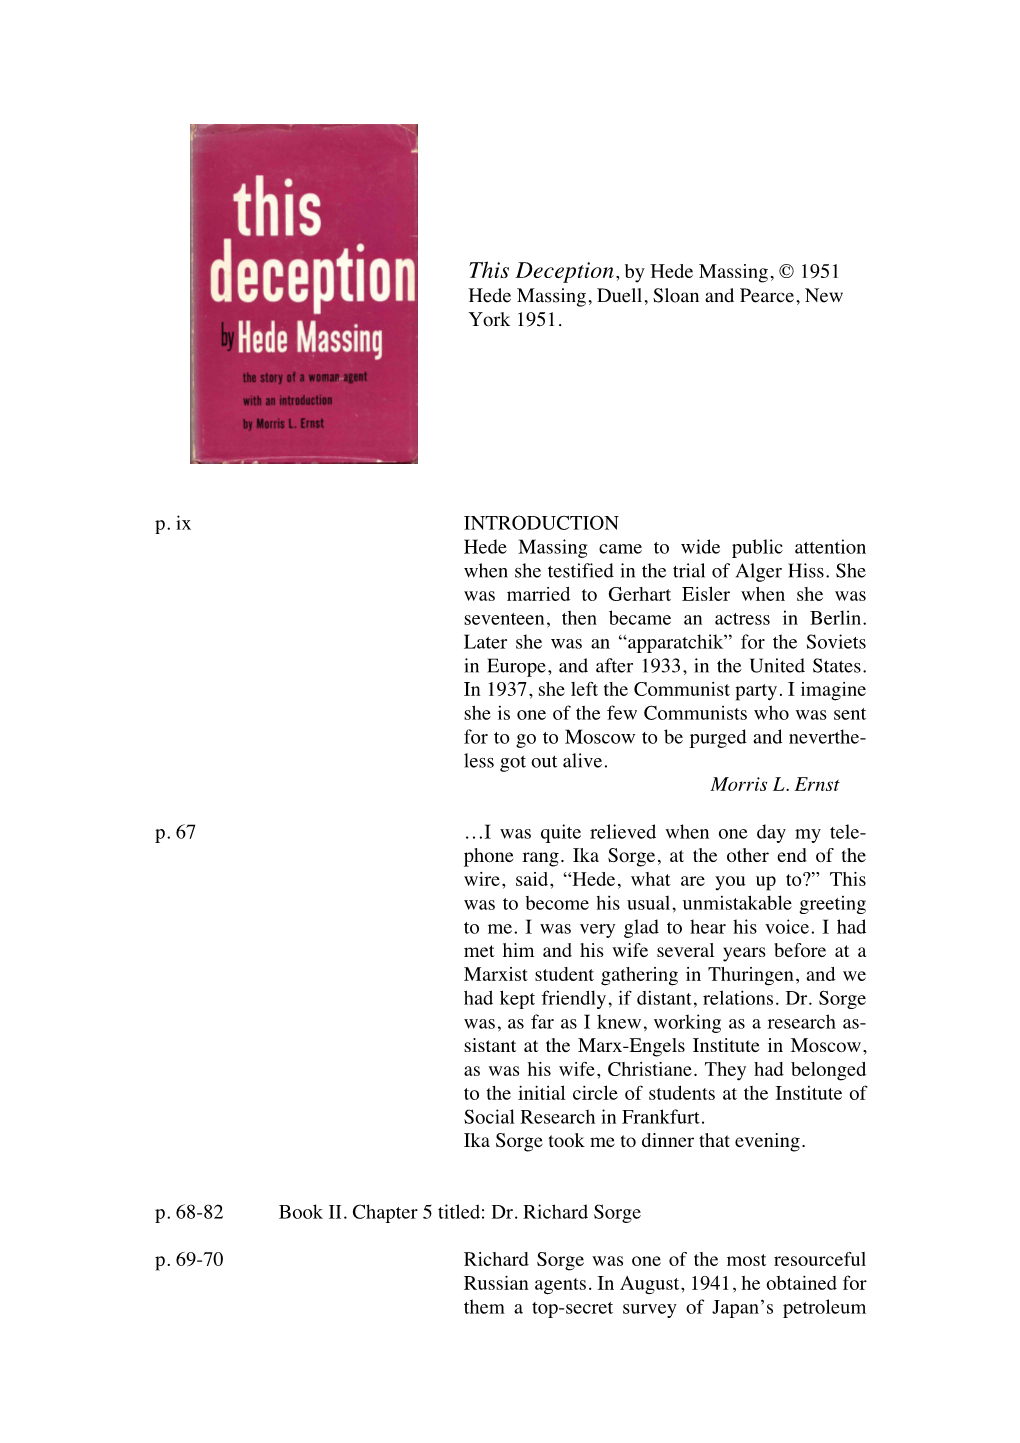 This Deception, by Hede Massing, © 1951 Hede Massing, Duell, Sloan and Pearce, New York 1951